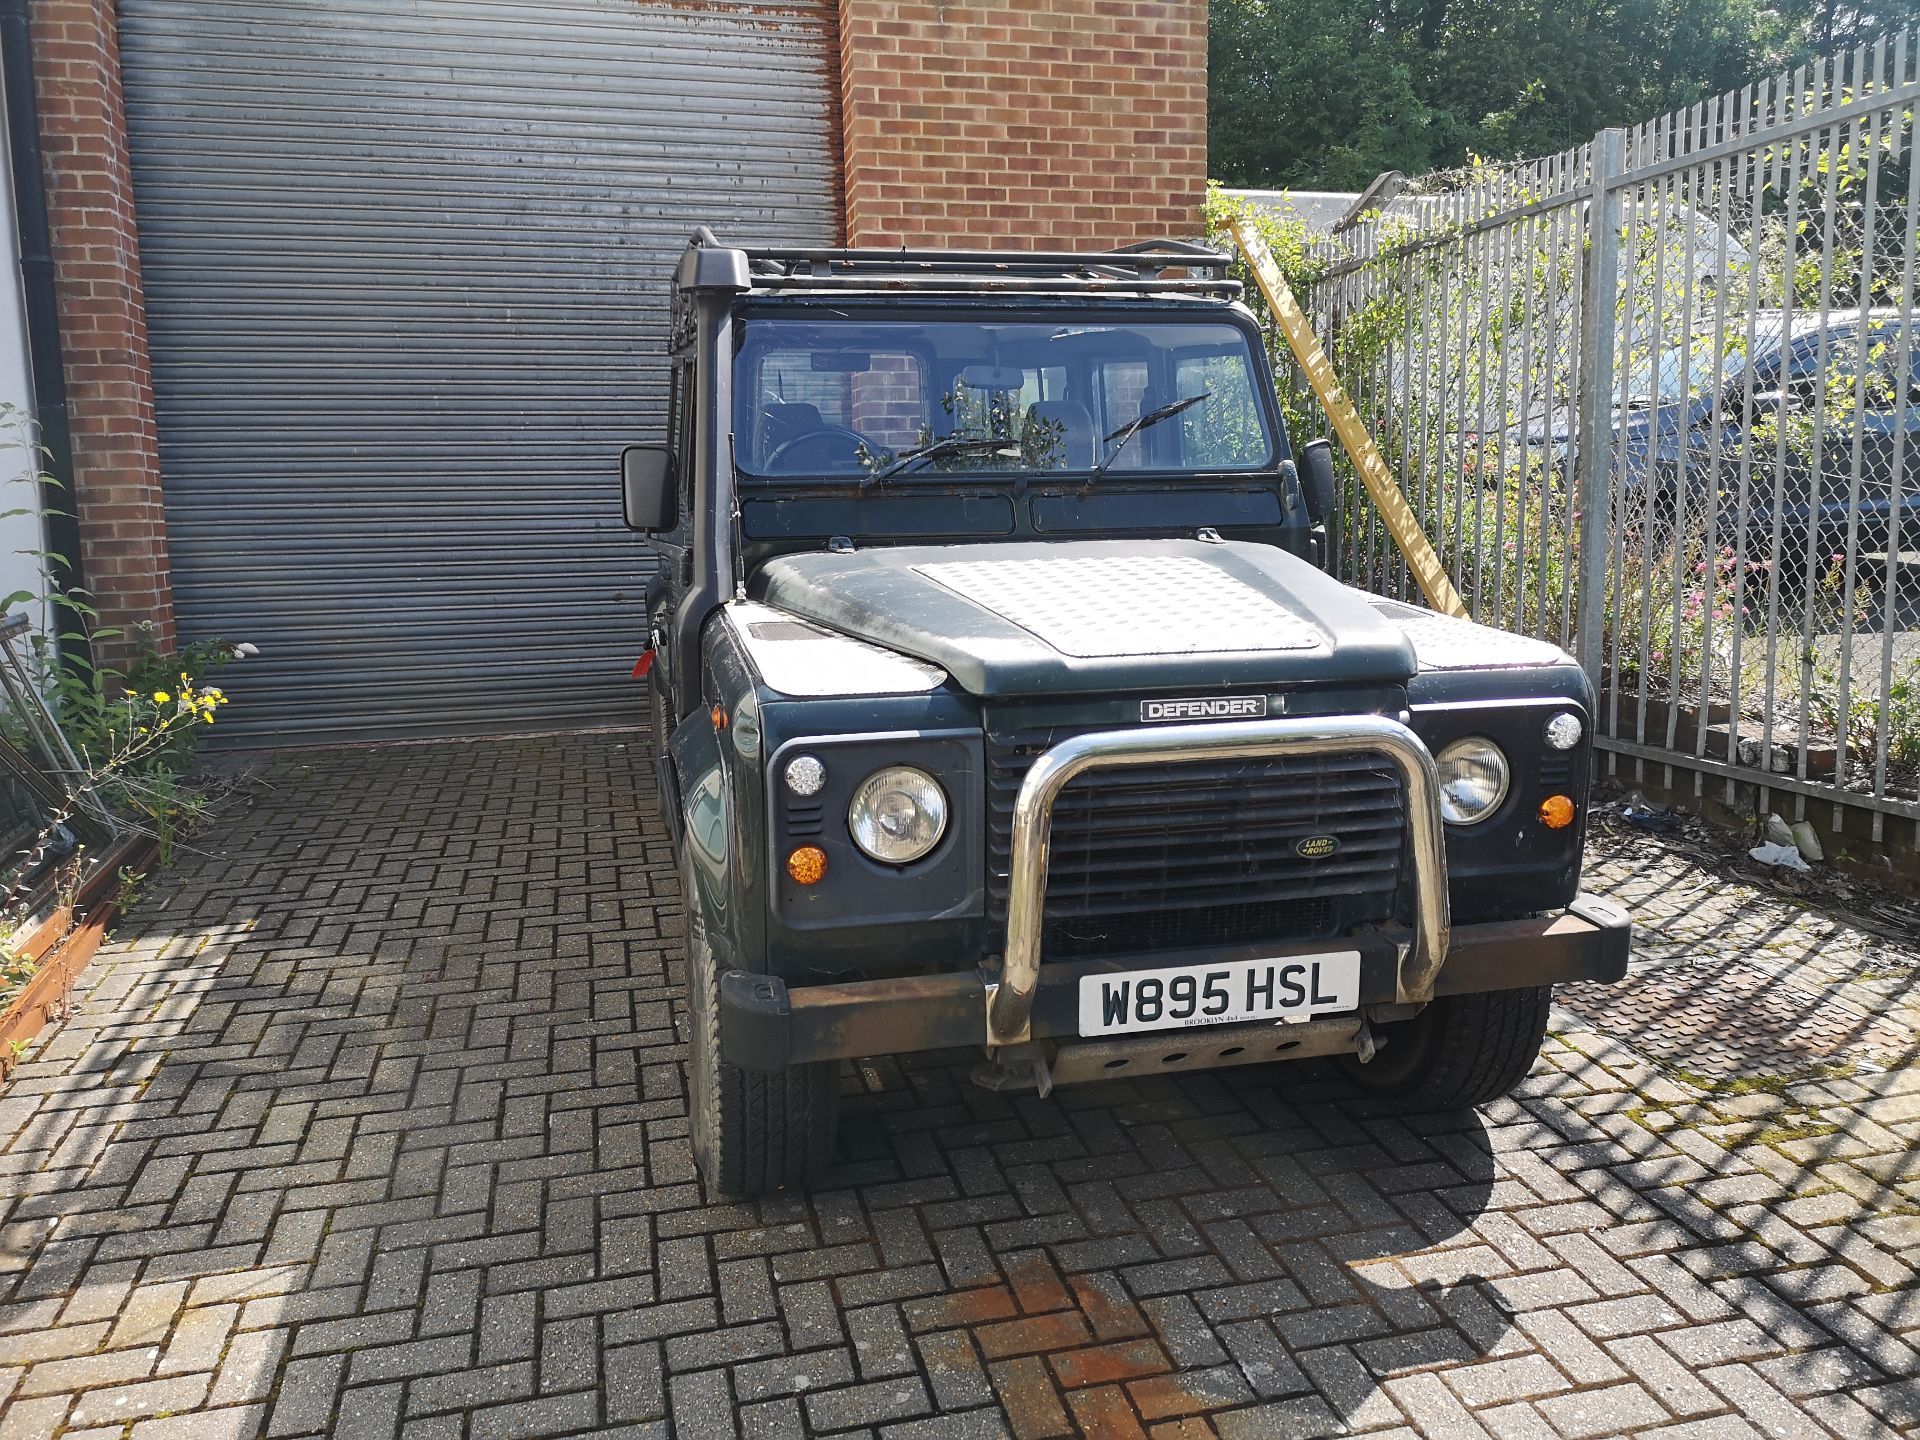 Land Rover Defender 110 County TD5 - Image 3 of 19